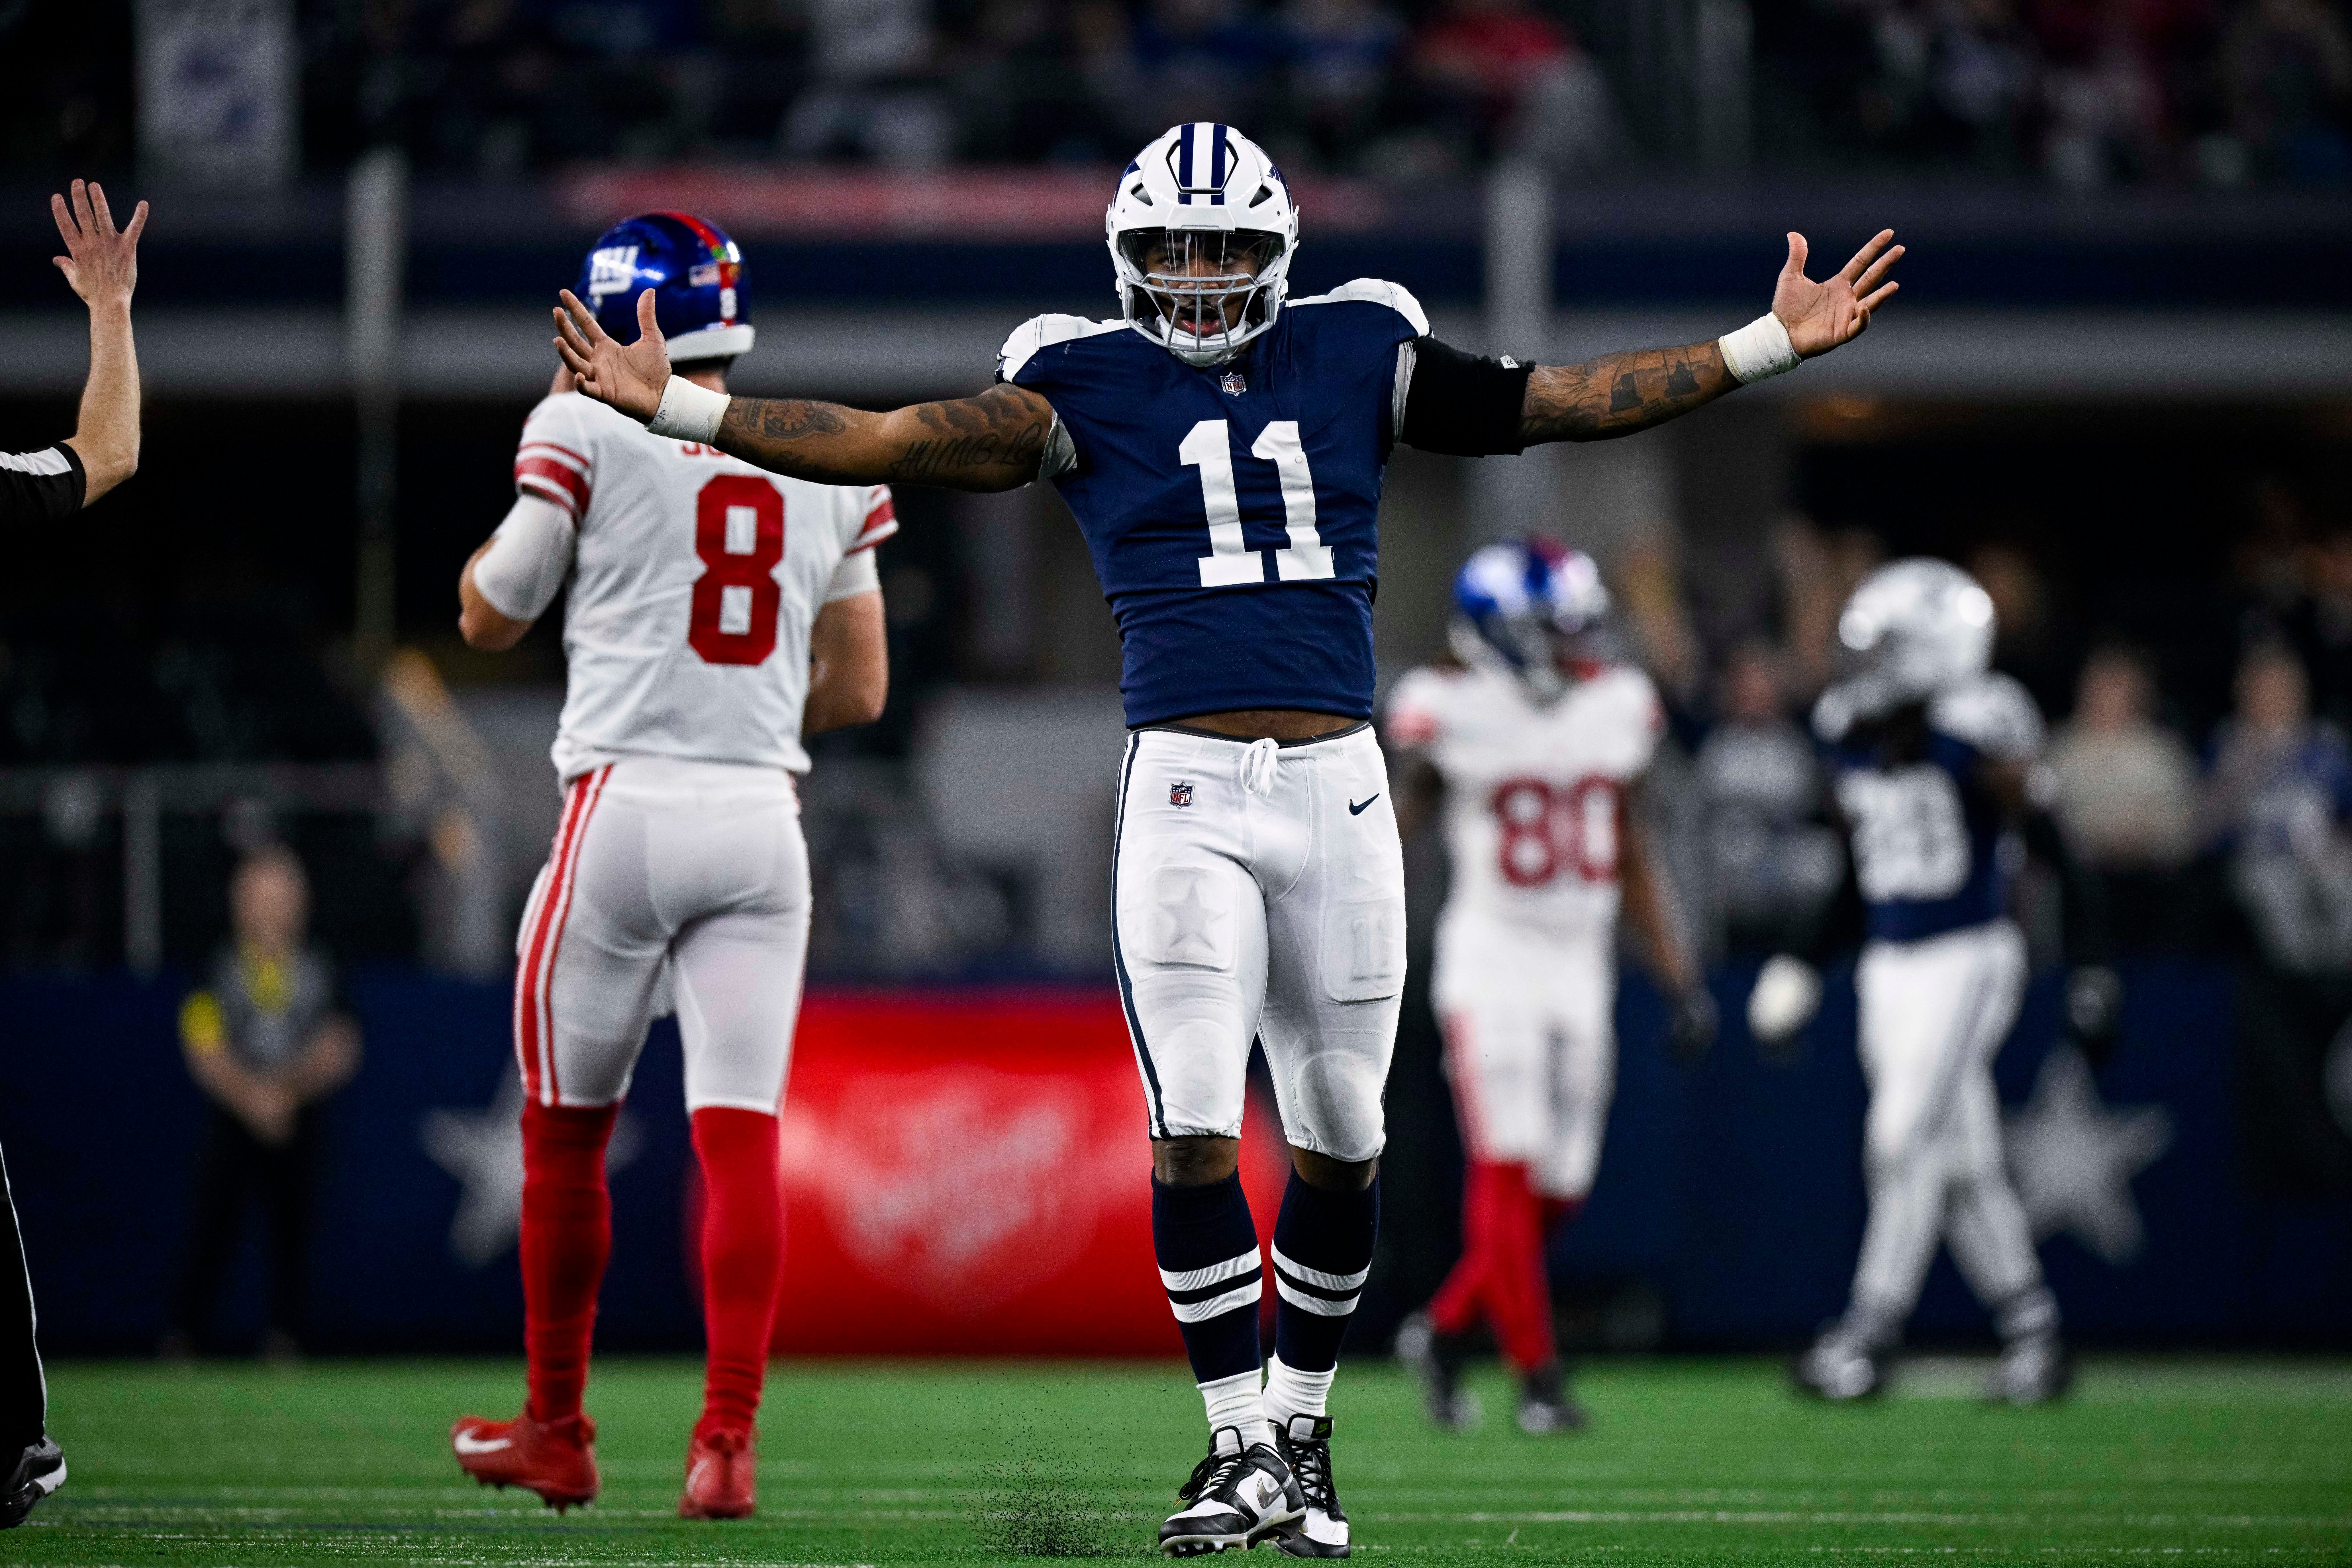 4a2e45b6-5a61-45ba-ba06-25808c0bfe7d-USP_NFL__New_York_Giants_at_Dallas_Cowboys Winners and losers from NFL's Thanksgiving tripleheader: Micah Parsons' legend grows, Bills back on road